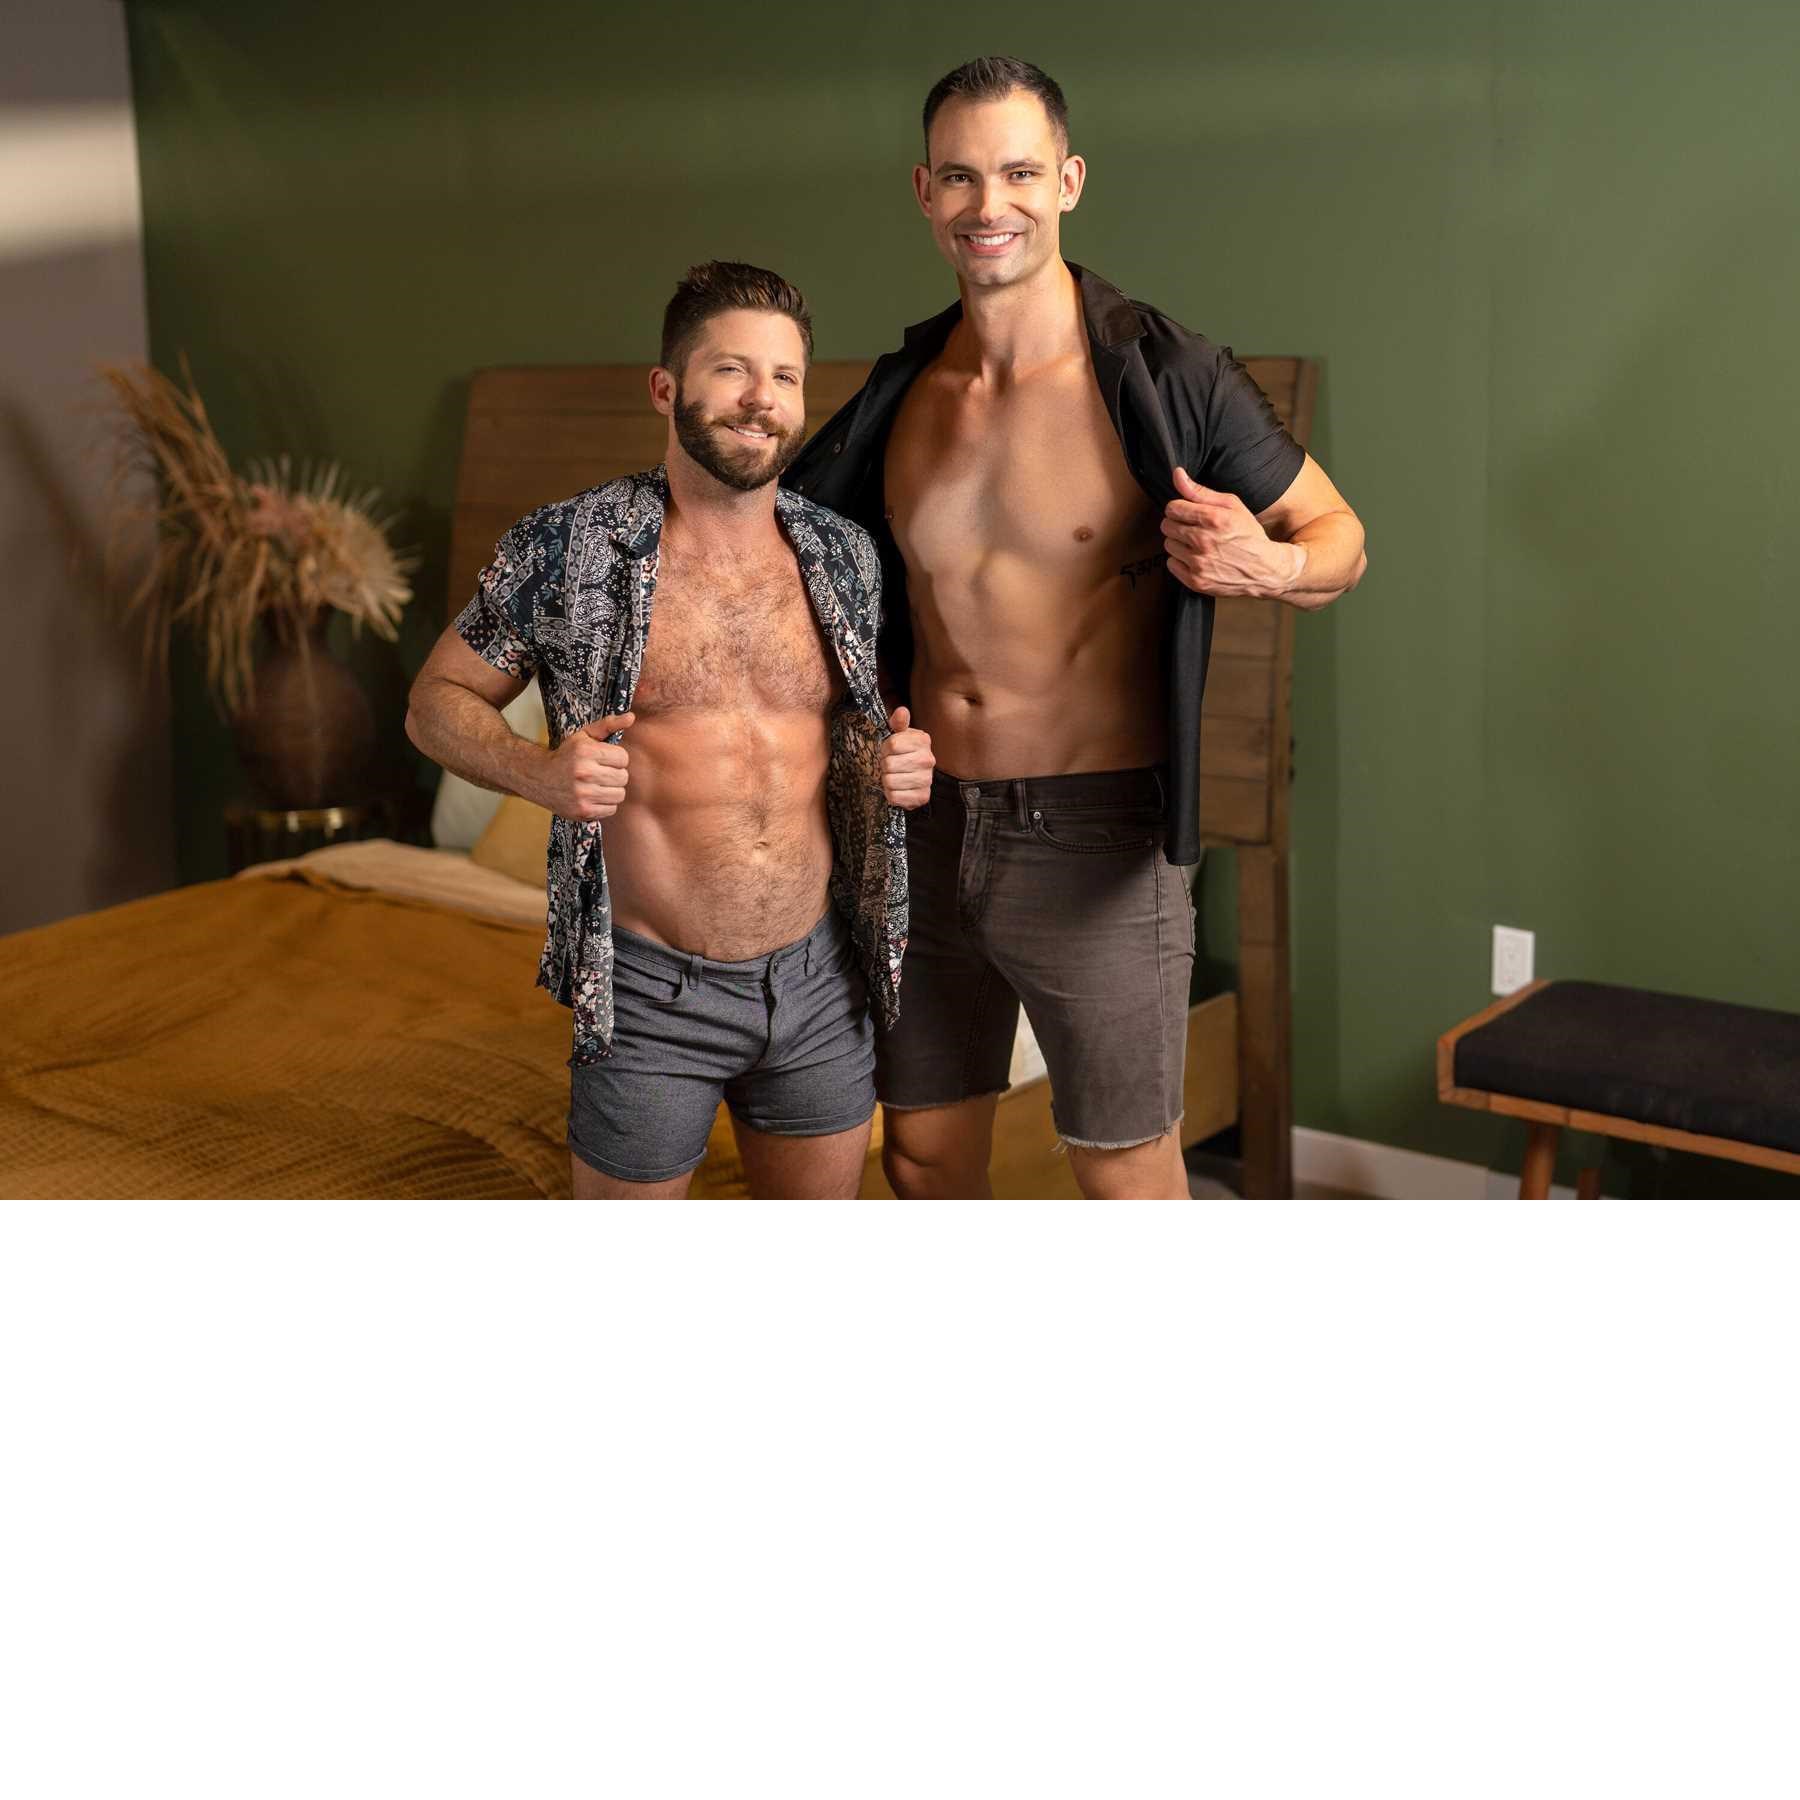 Two males posed revealing chests